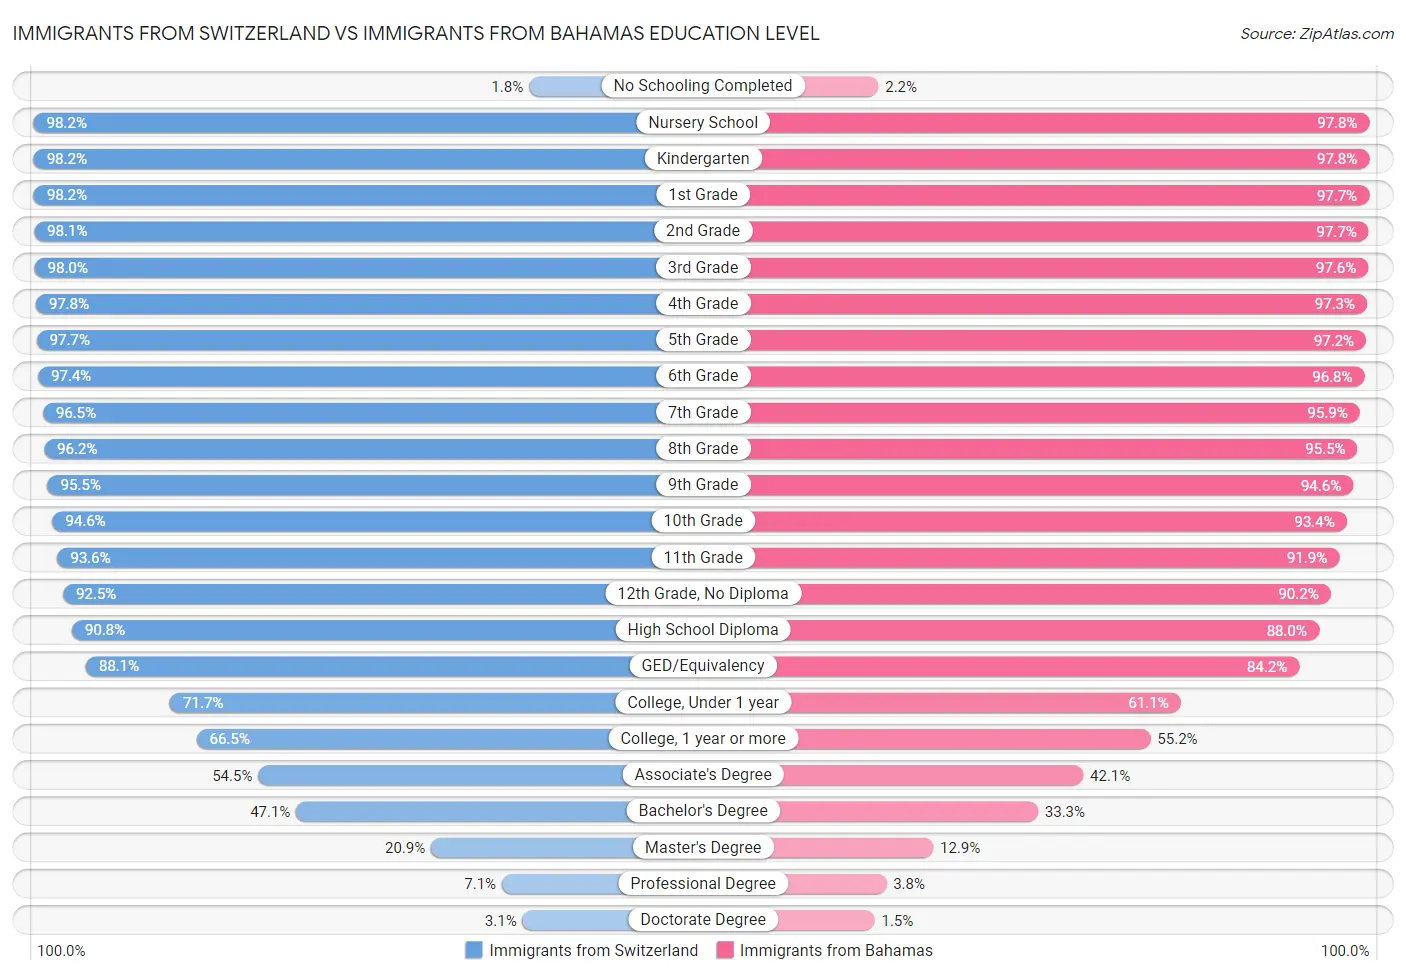 Immigrants from Switzerland vs Immigrants from Bahamas Education Level